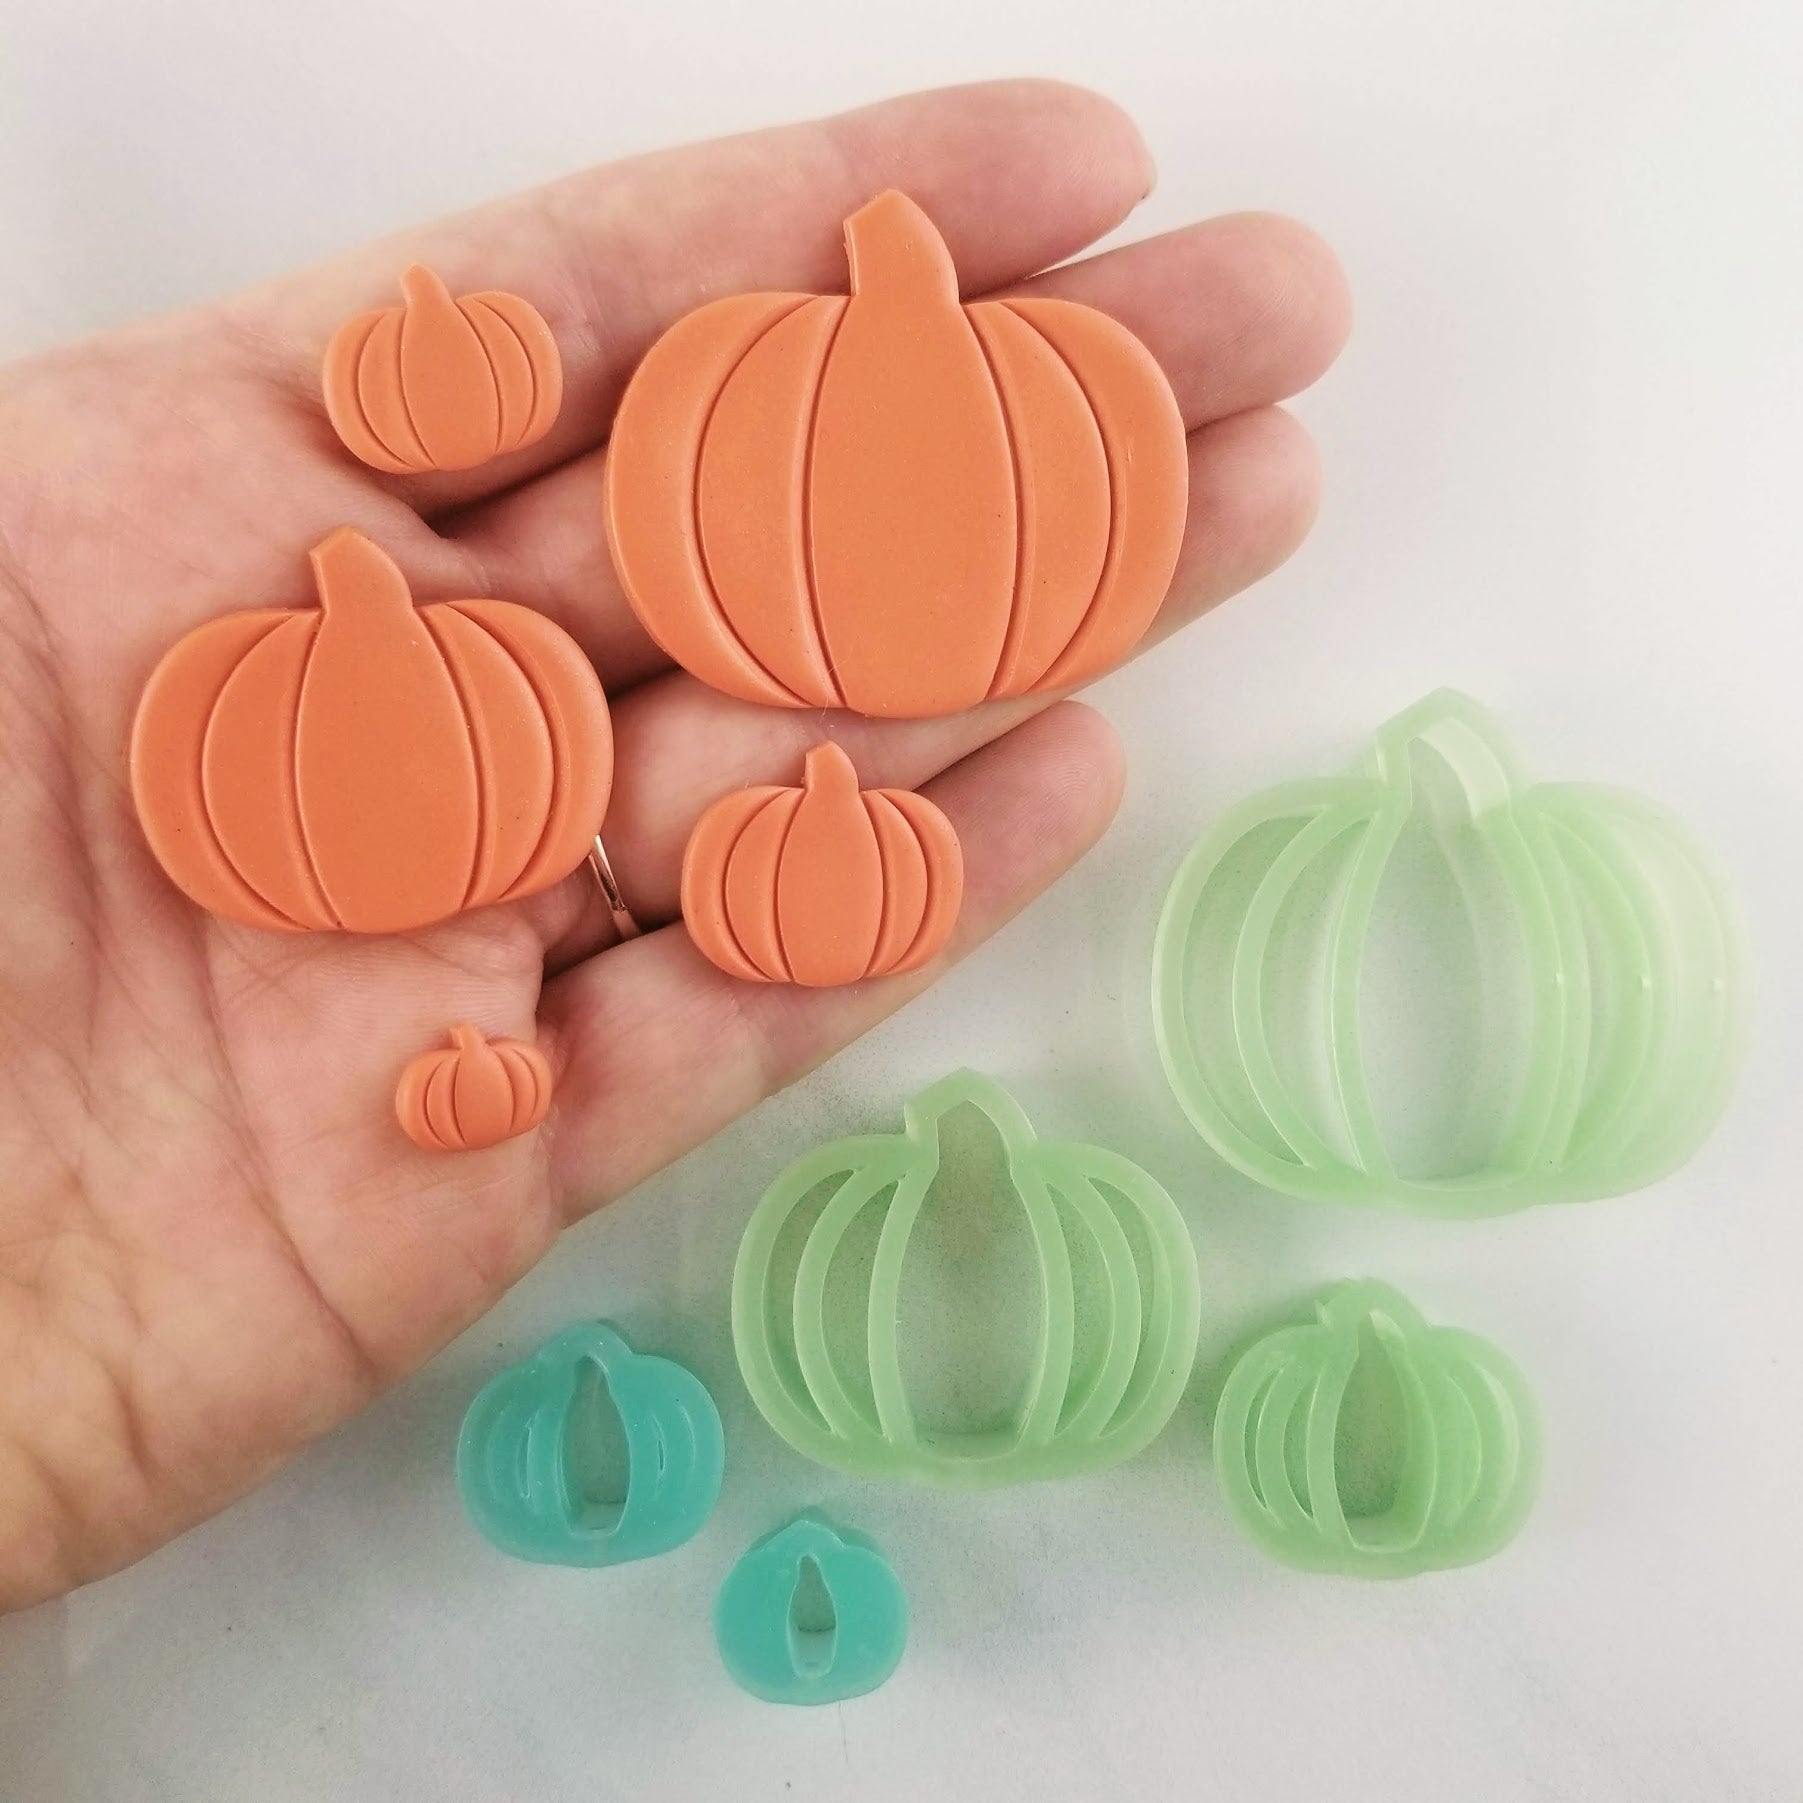 Plastic Polymer Clay Cutters for Earrings - Cute Shapes, Clean Cut - Orange